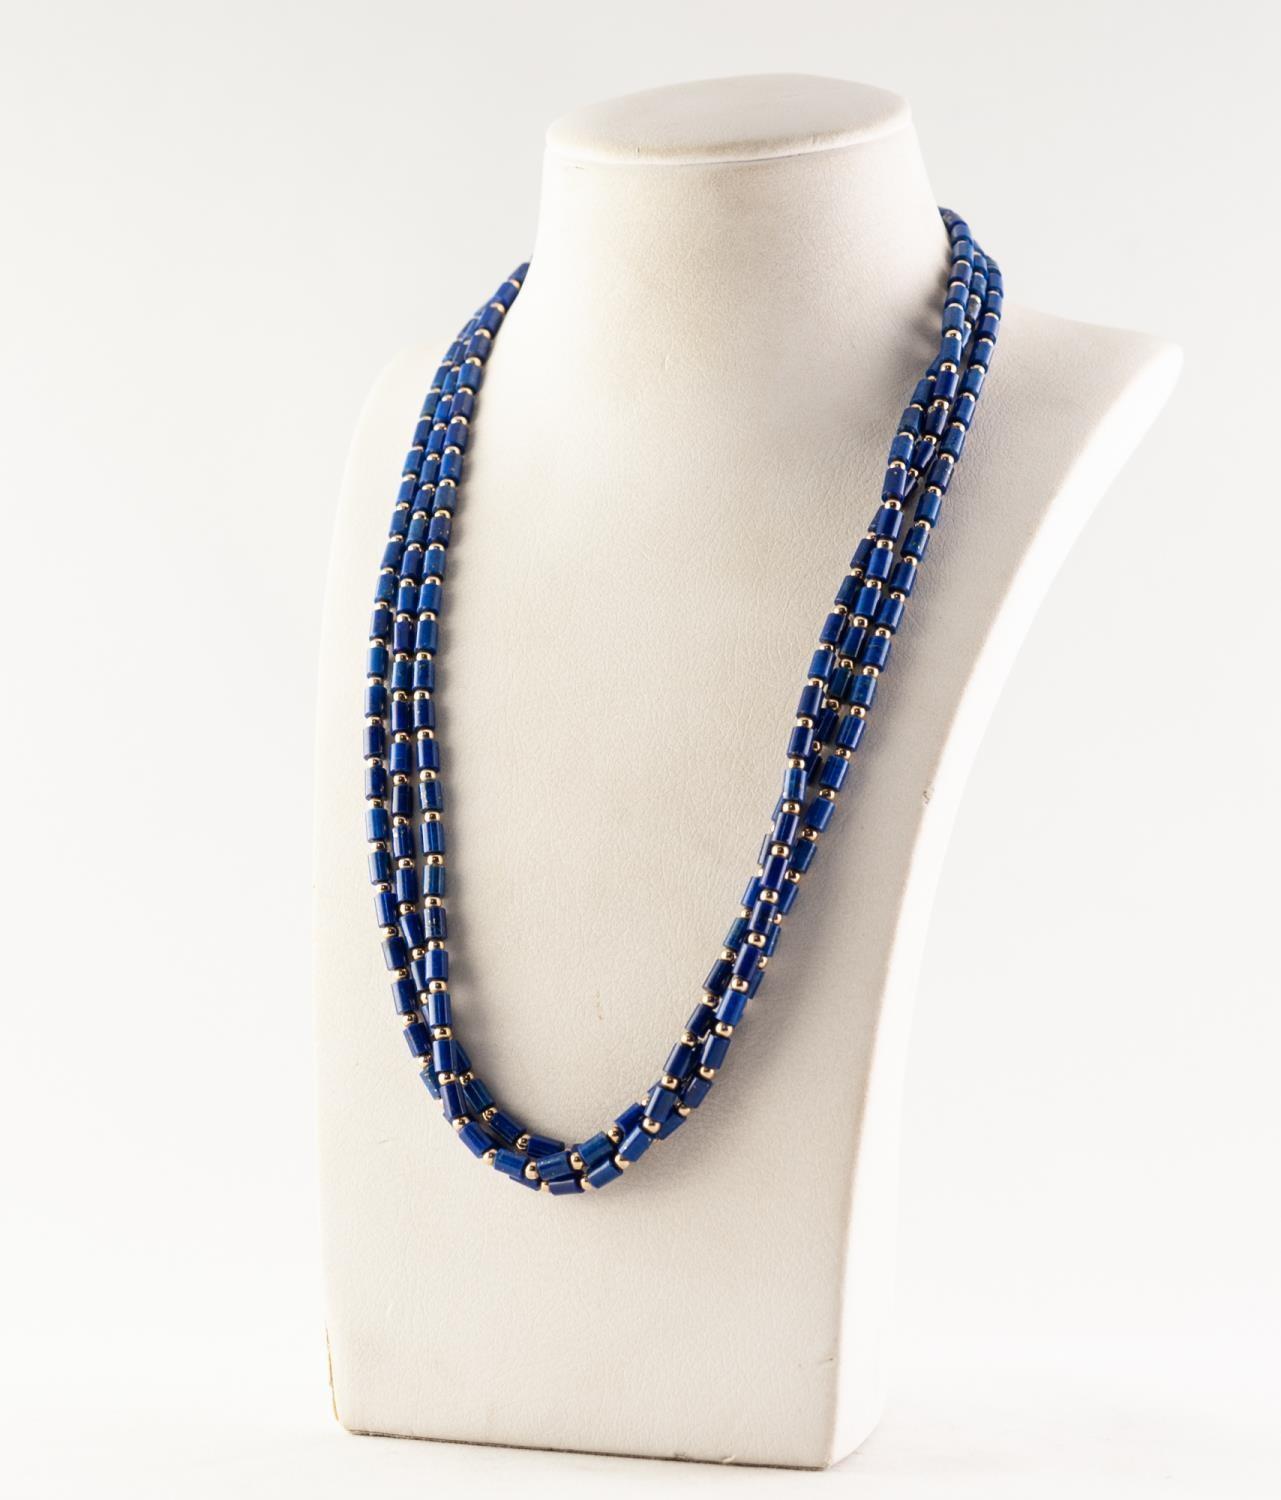 TRIPLE STRAND NECKLACE OF SMALL LAPIS LAZULI BUGLE BEADS with tiny gold coloured metal bead spacers,